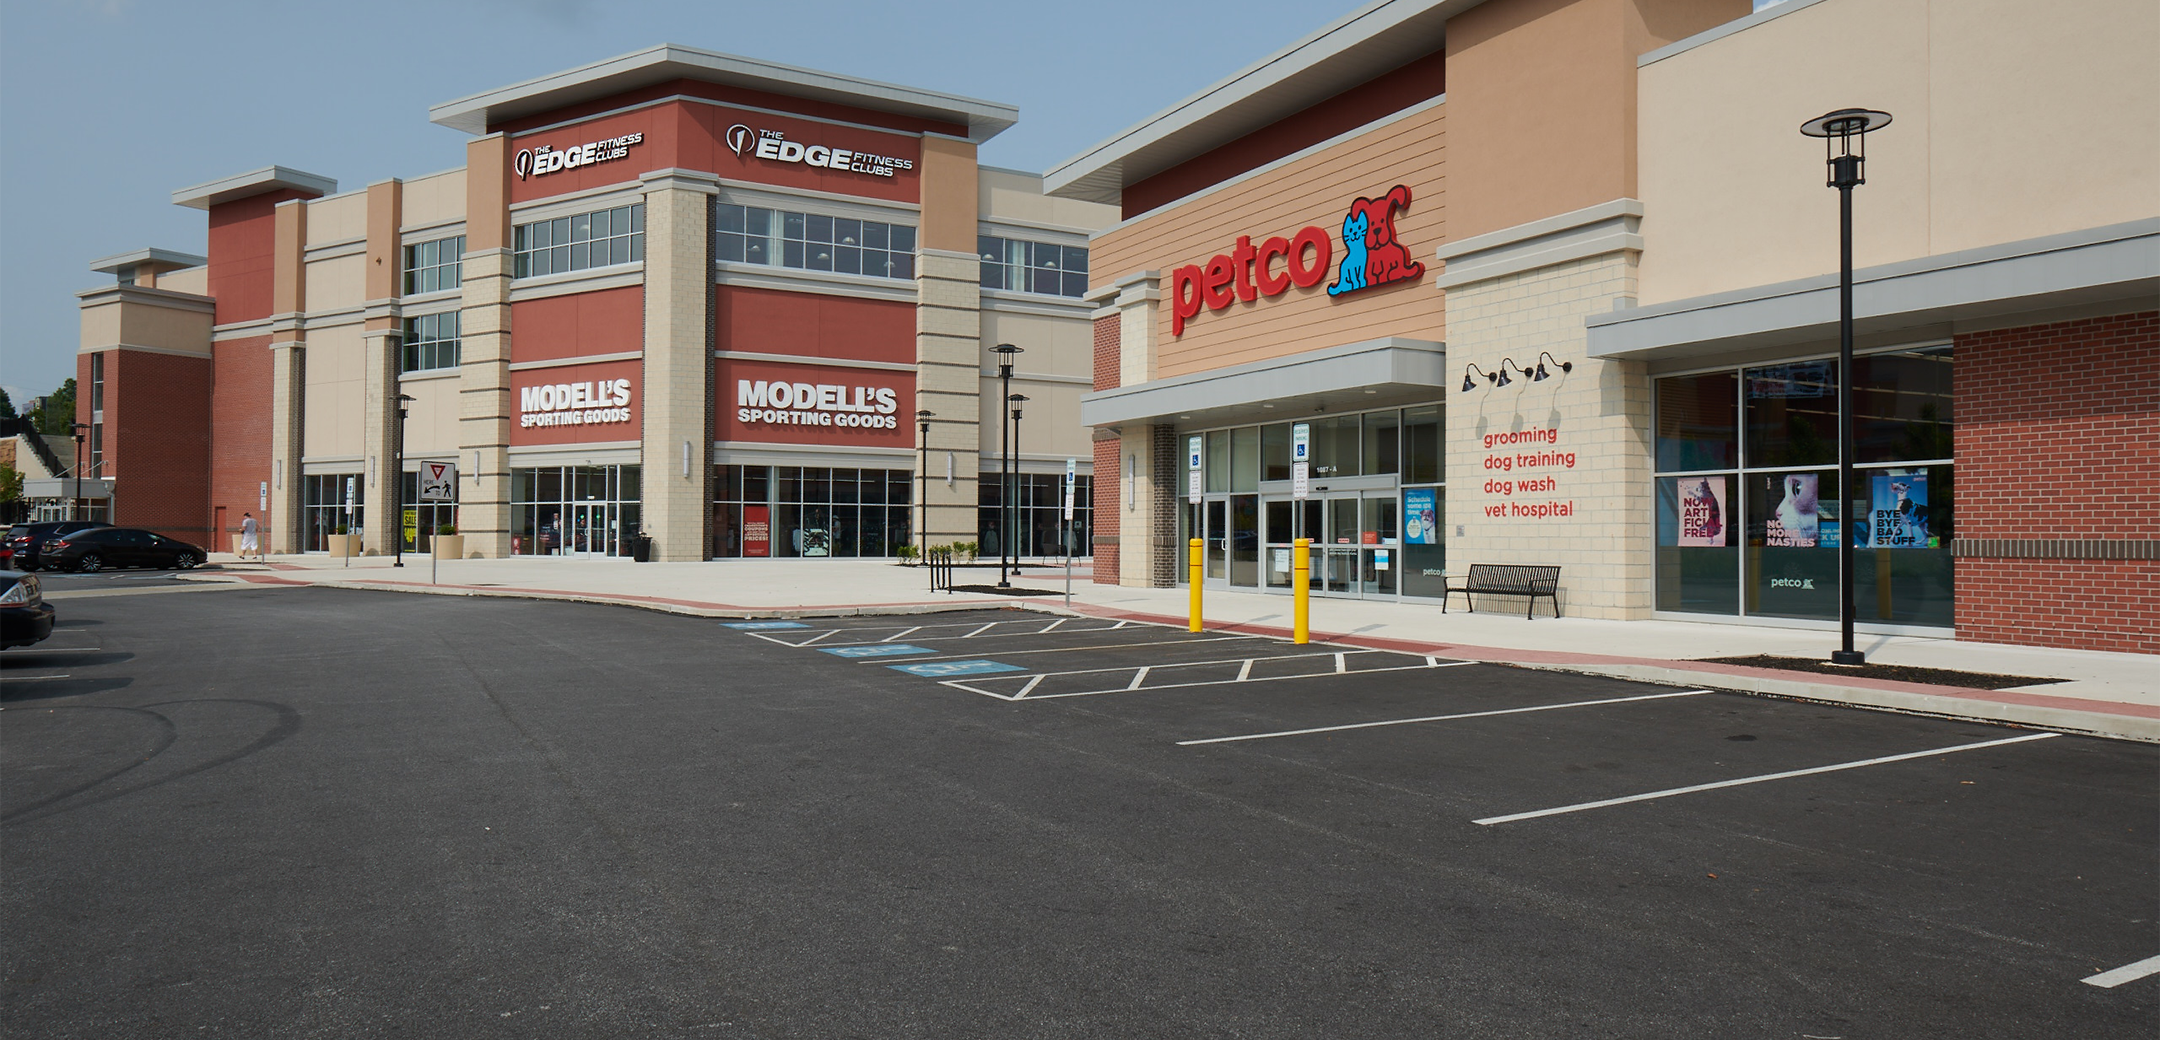 An angled view of the Promenade at Granite Run red and tan brick building, showcasing the "Petco" and "modell's" signage and front parking lot.